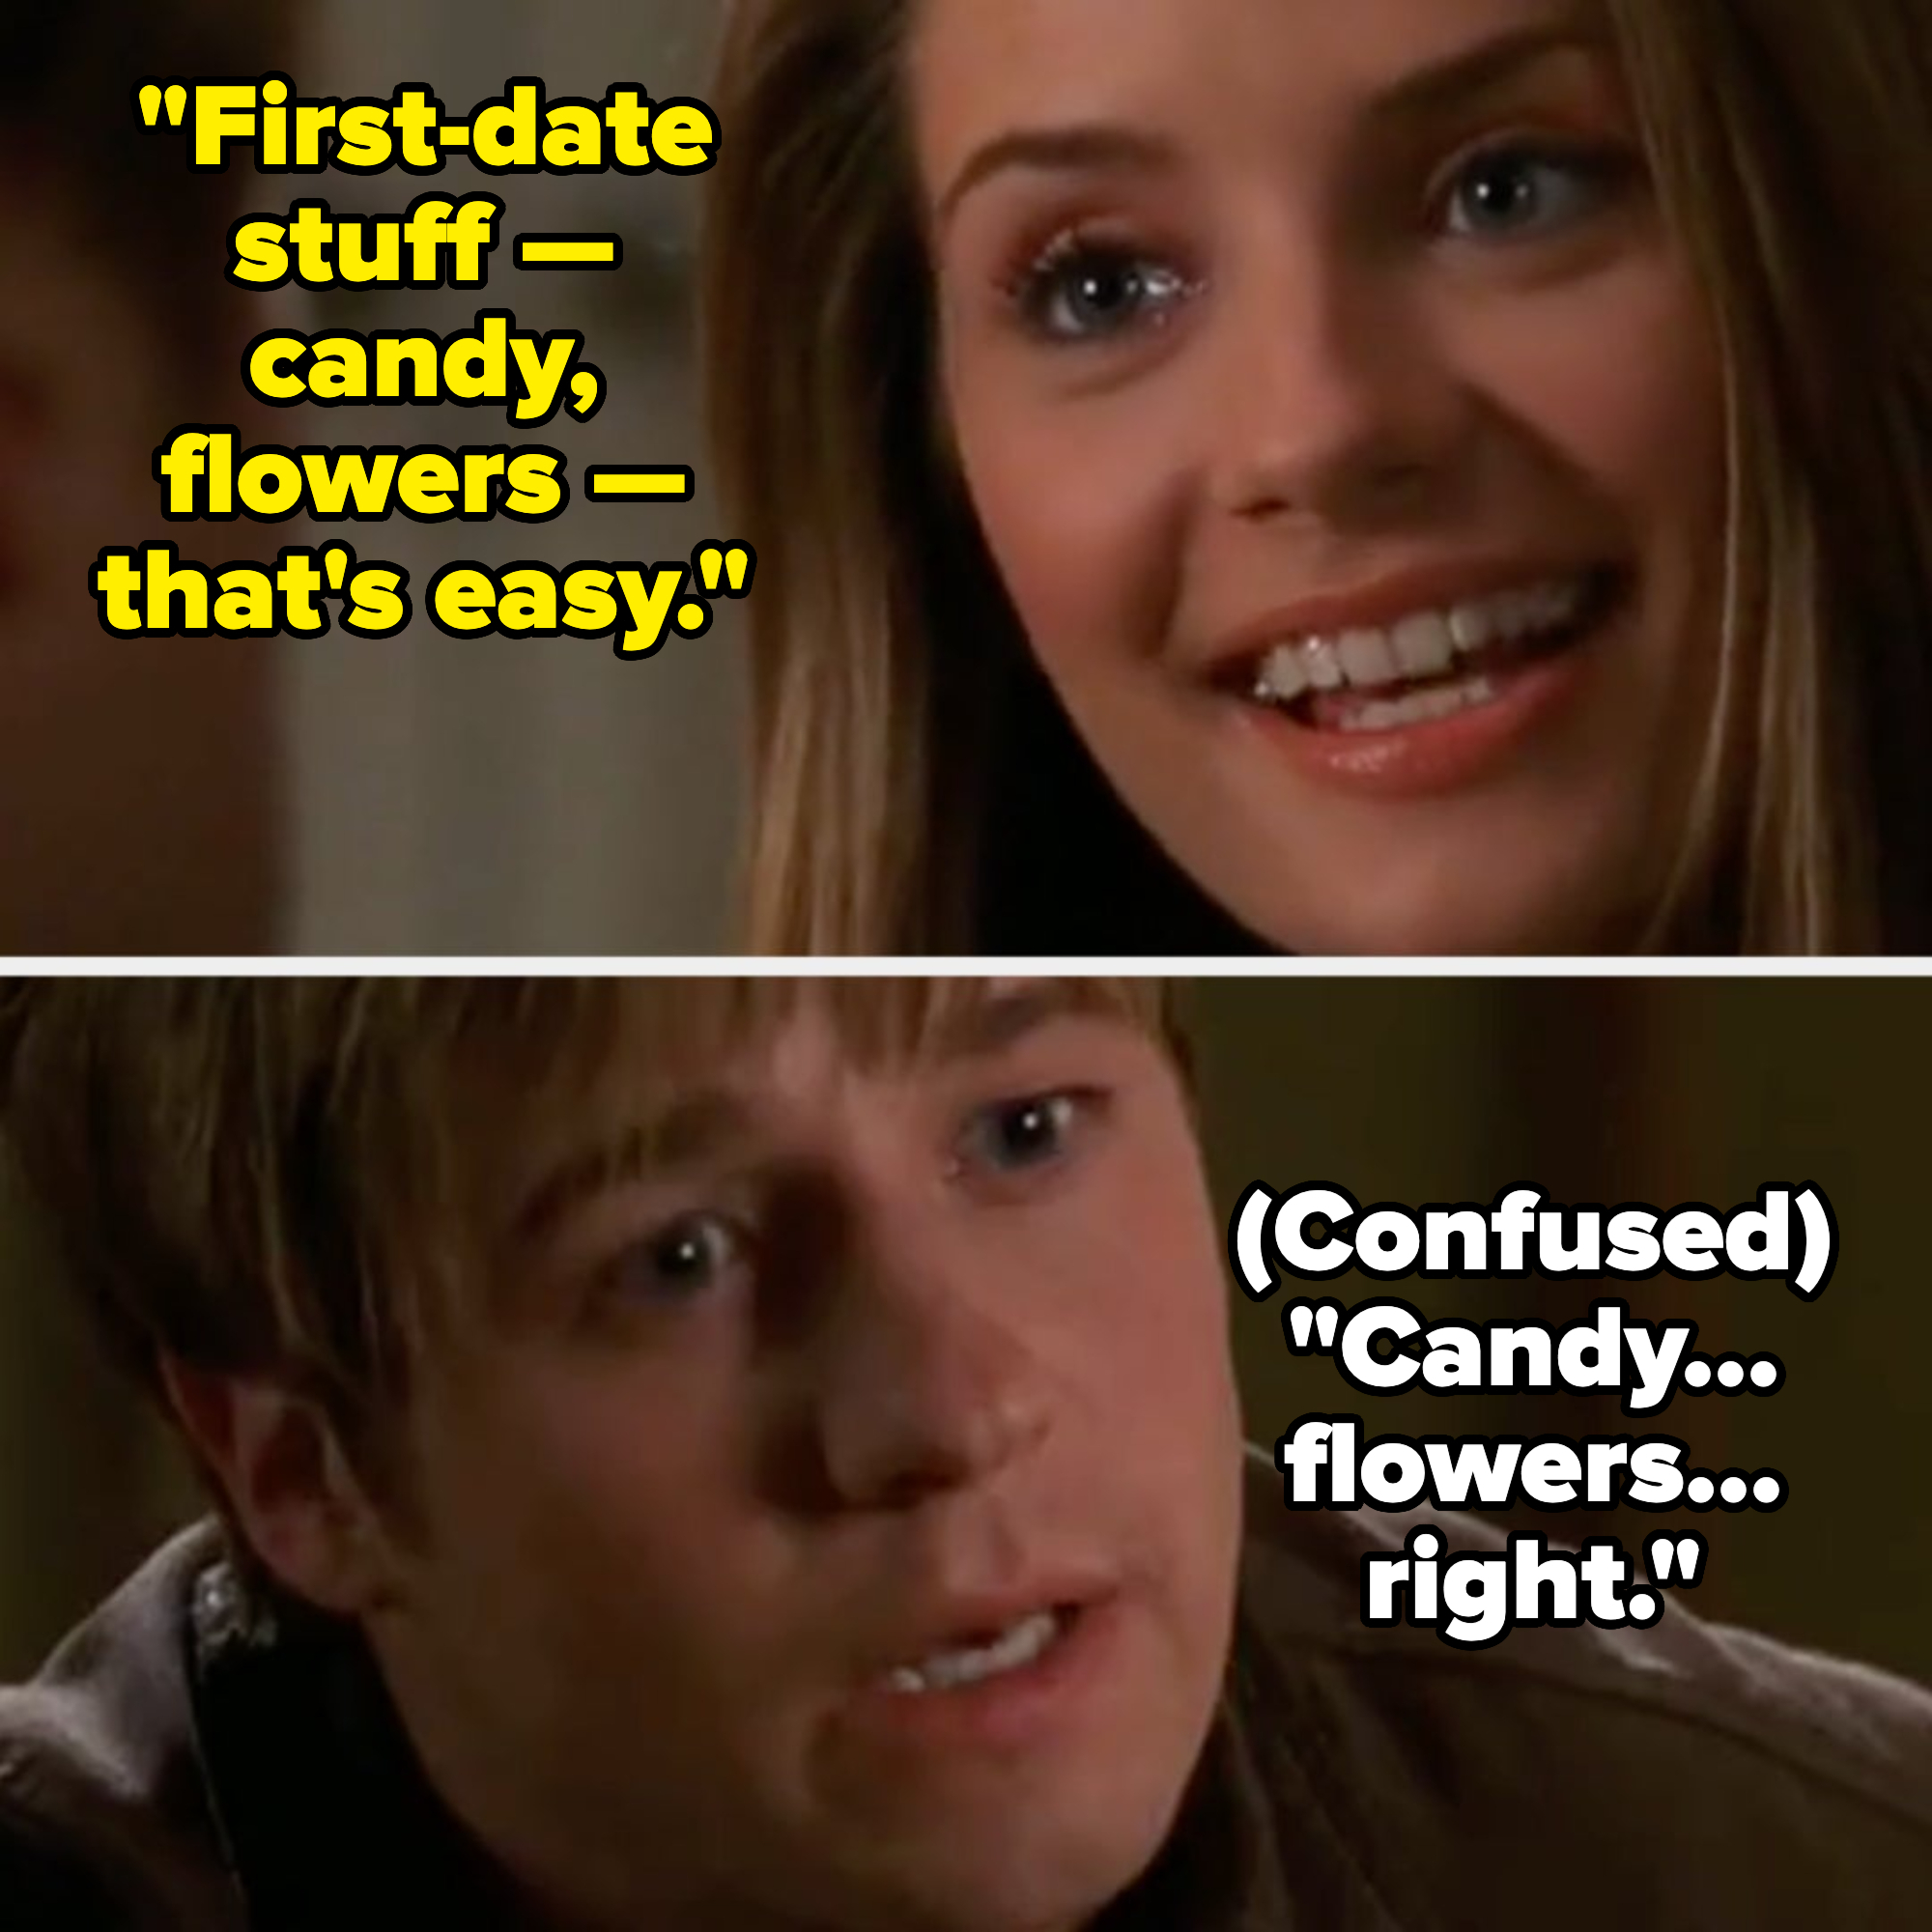 Two characters from a TV show engaged in a conversation, close-up shots of their emotional expressions, with the young woman saying &quot;&quot;First date stuff — candy, flowers —that&#x27;s easy&quot; and the young man, confused, saying &quot;Candy, flowers, right&quot;